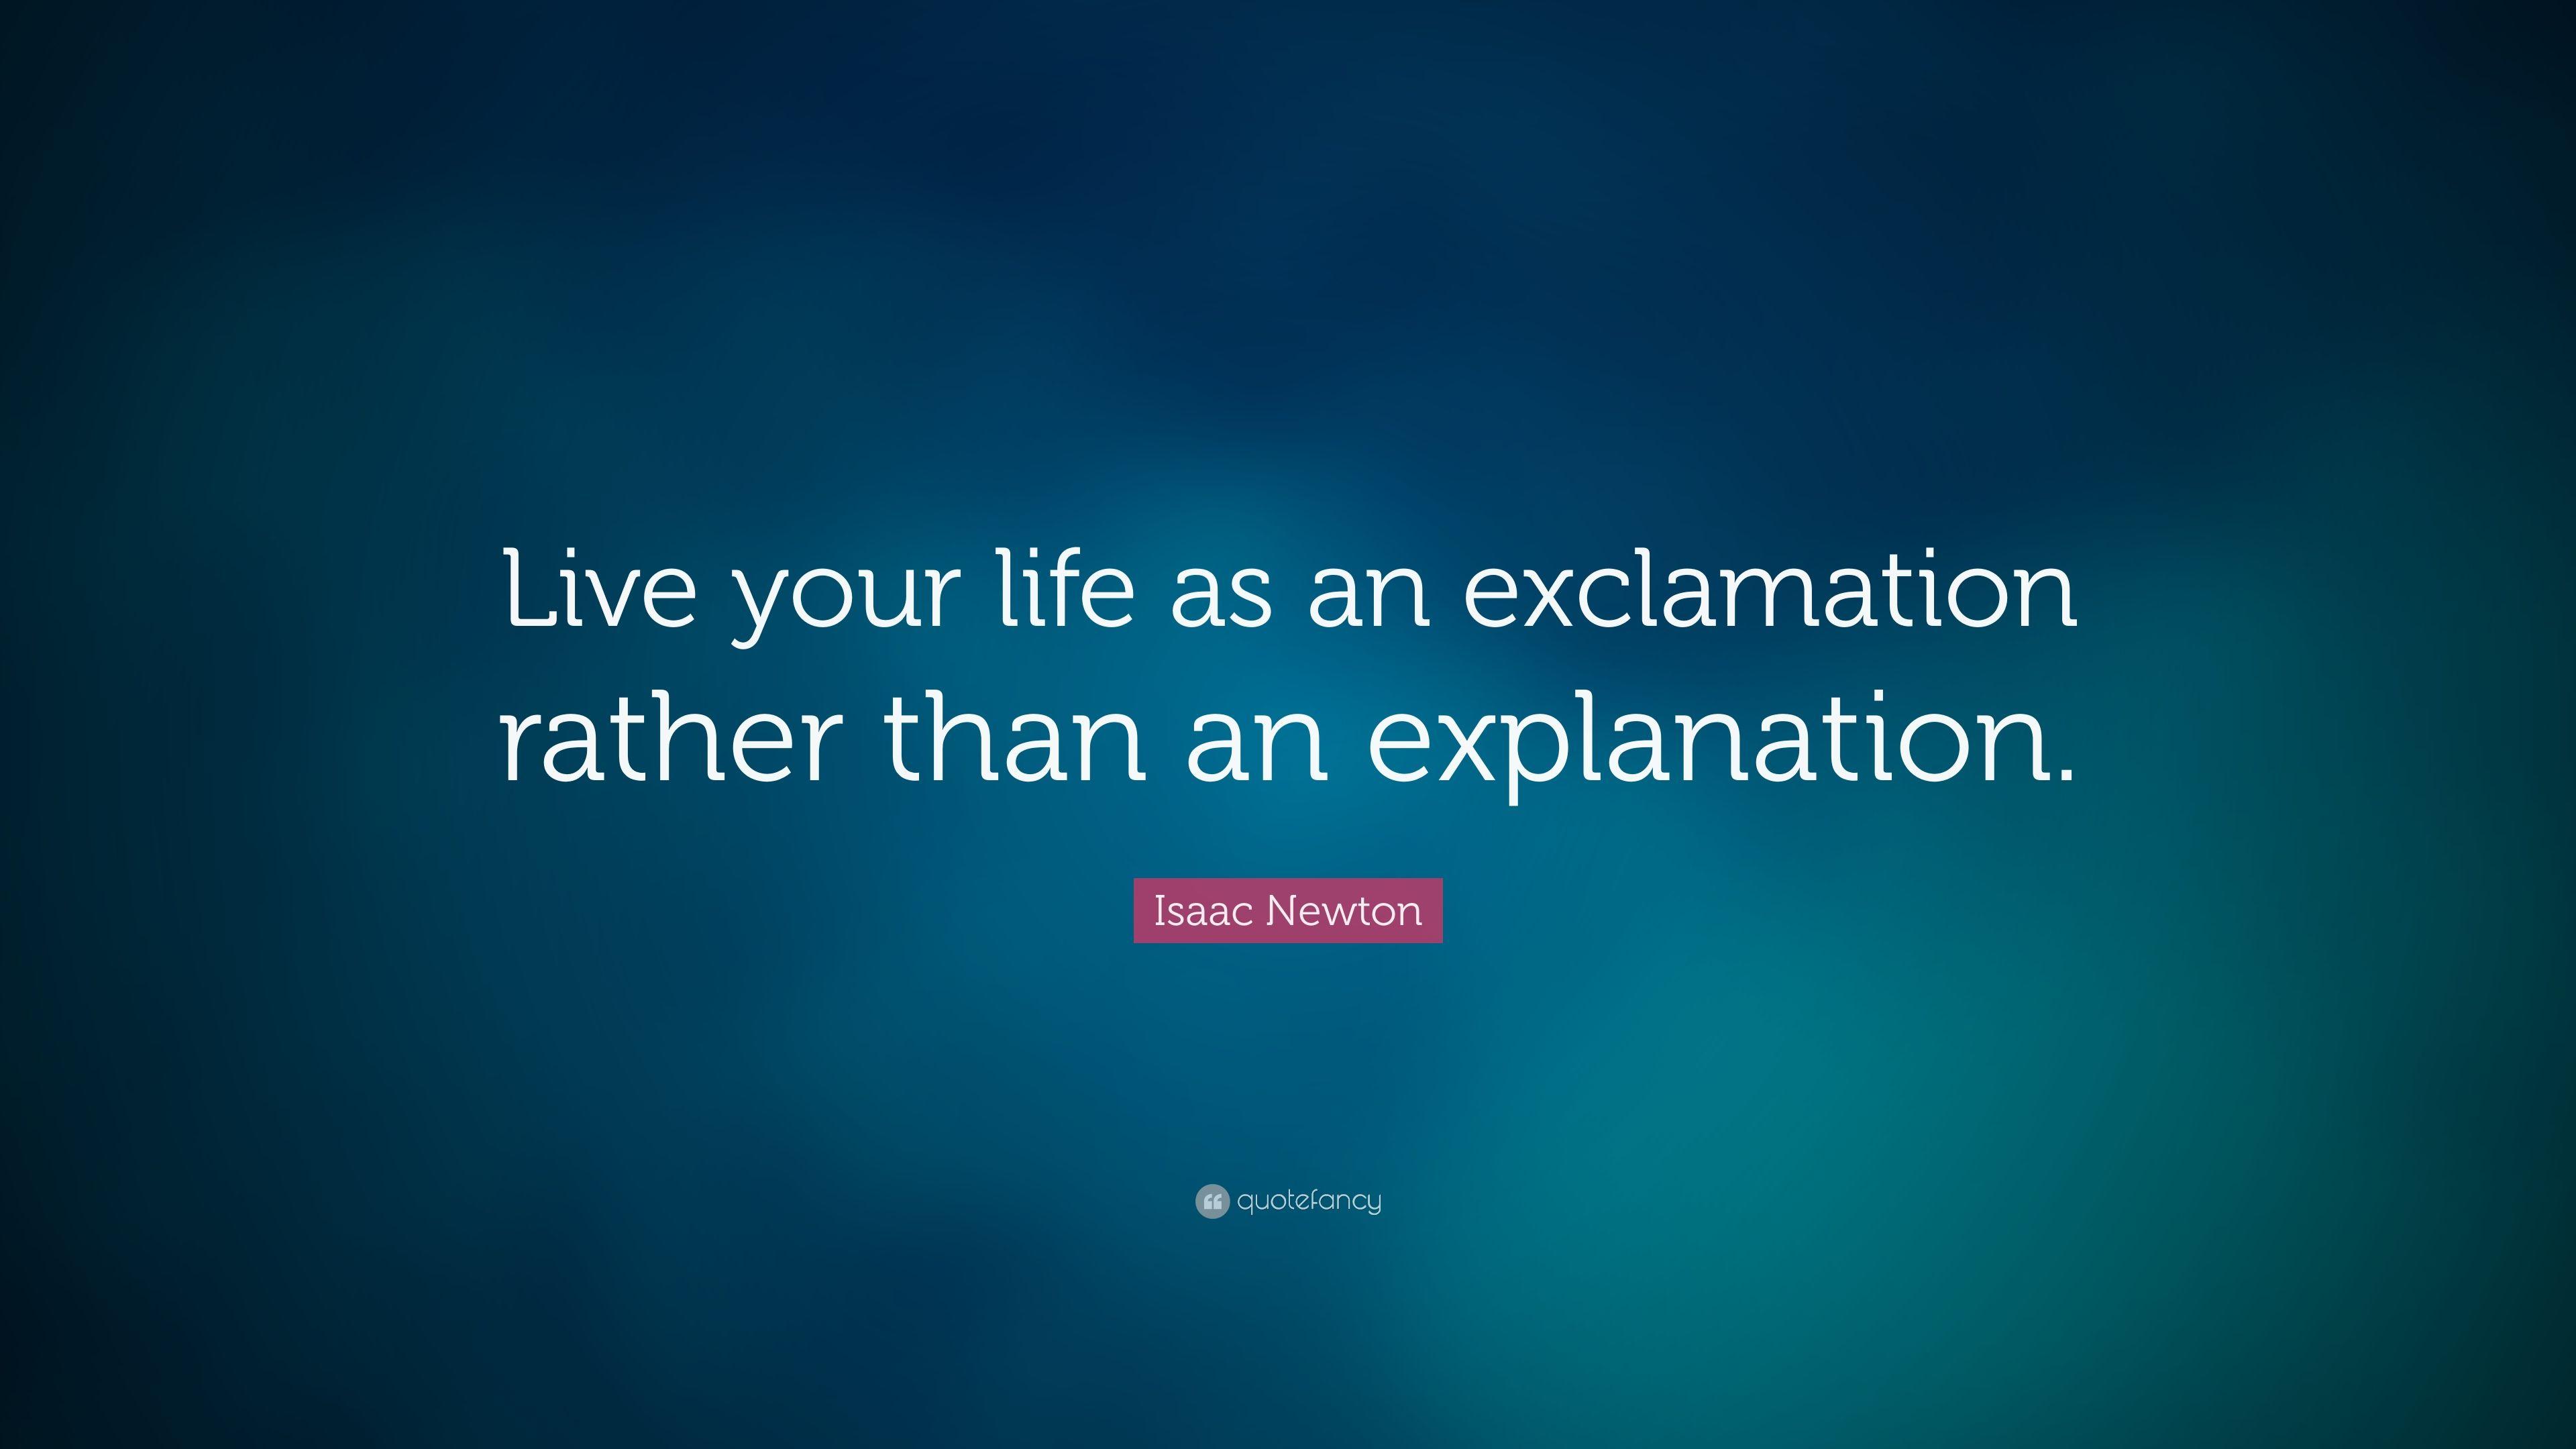 Isaac Newton Quote: “Live your life as an exclamation rather than